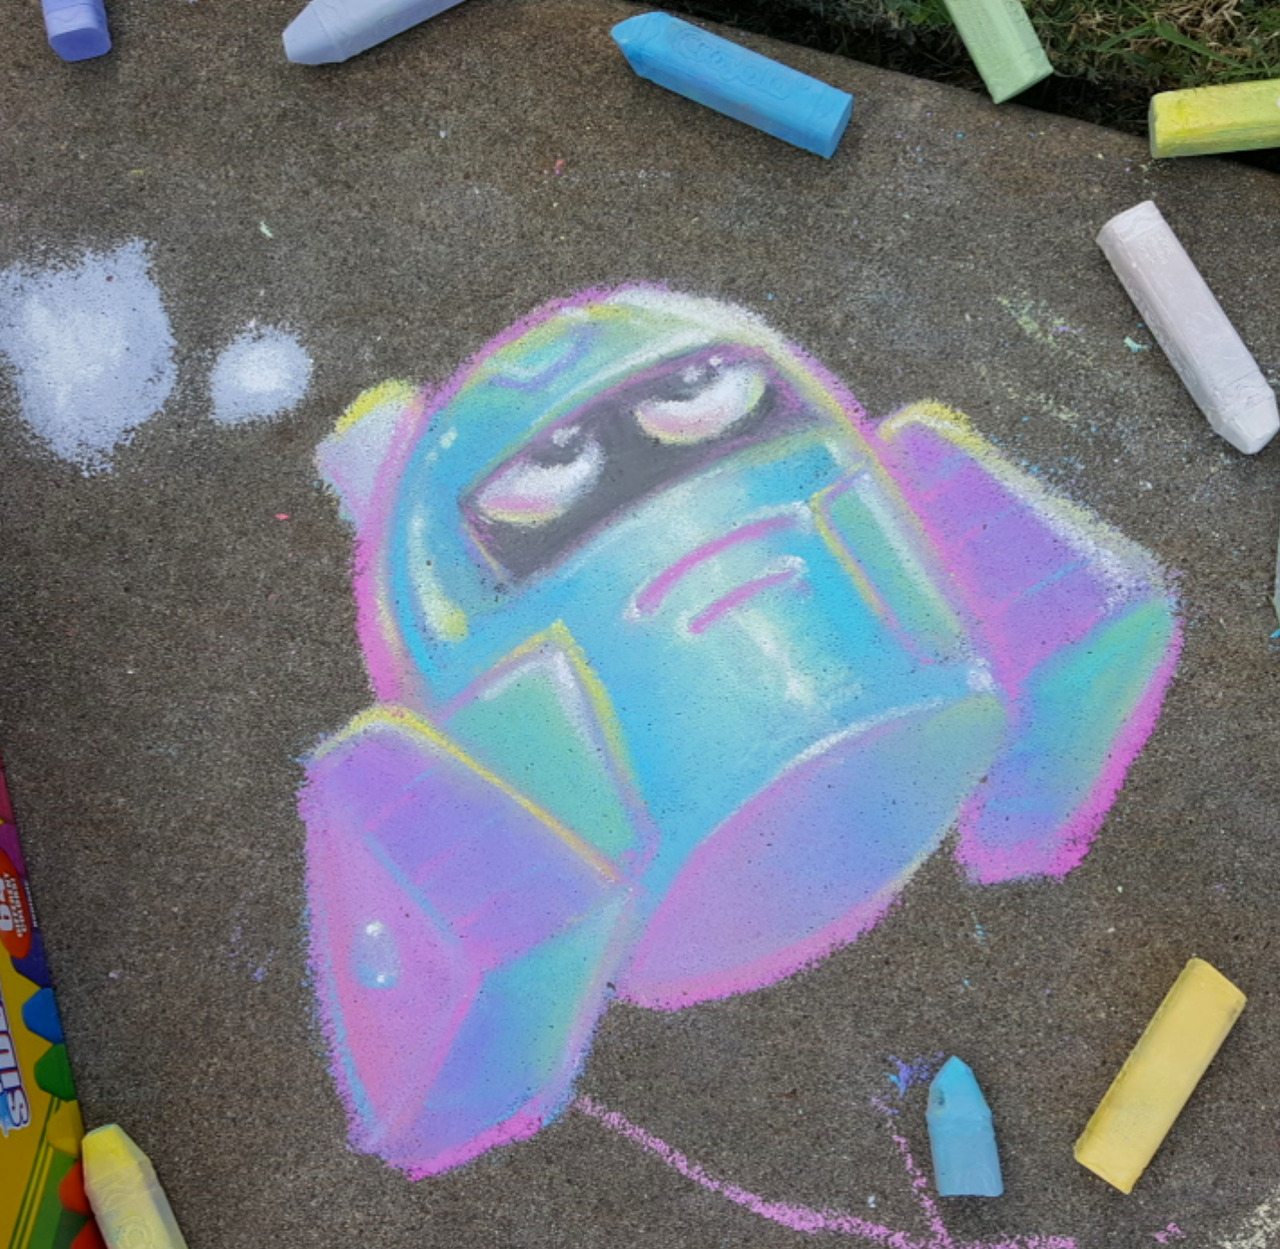 finally had some good weather, so I got out some chalk and drew my Boxmore fave